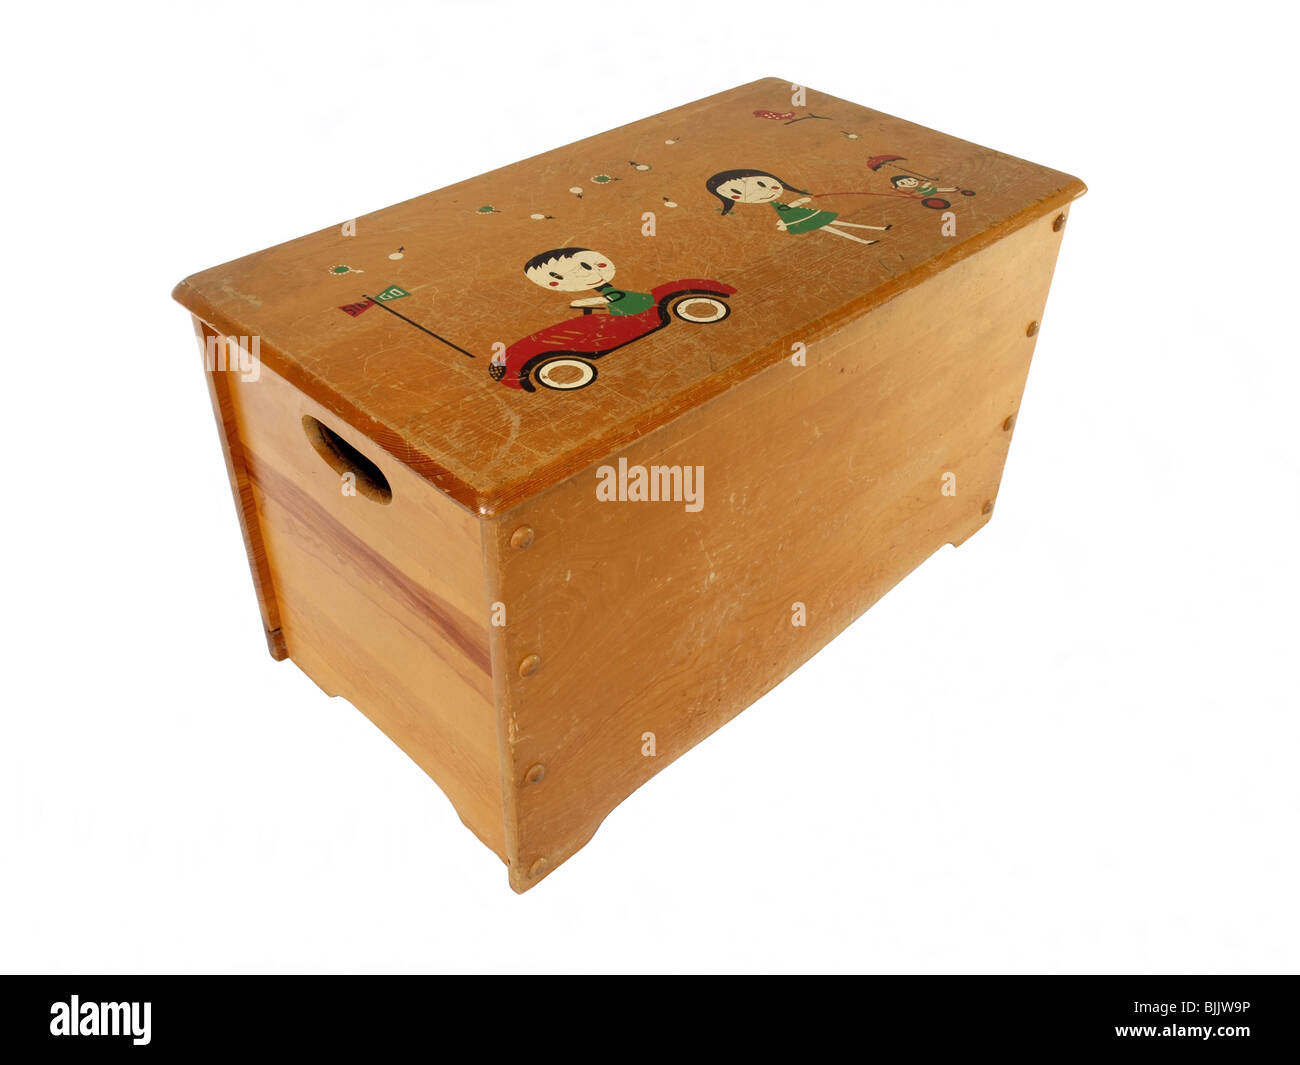 Vintage wooden toy box from the 1950's Stock Photo - Alamy